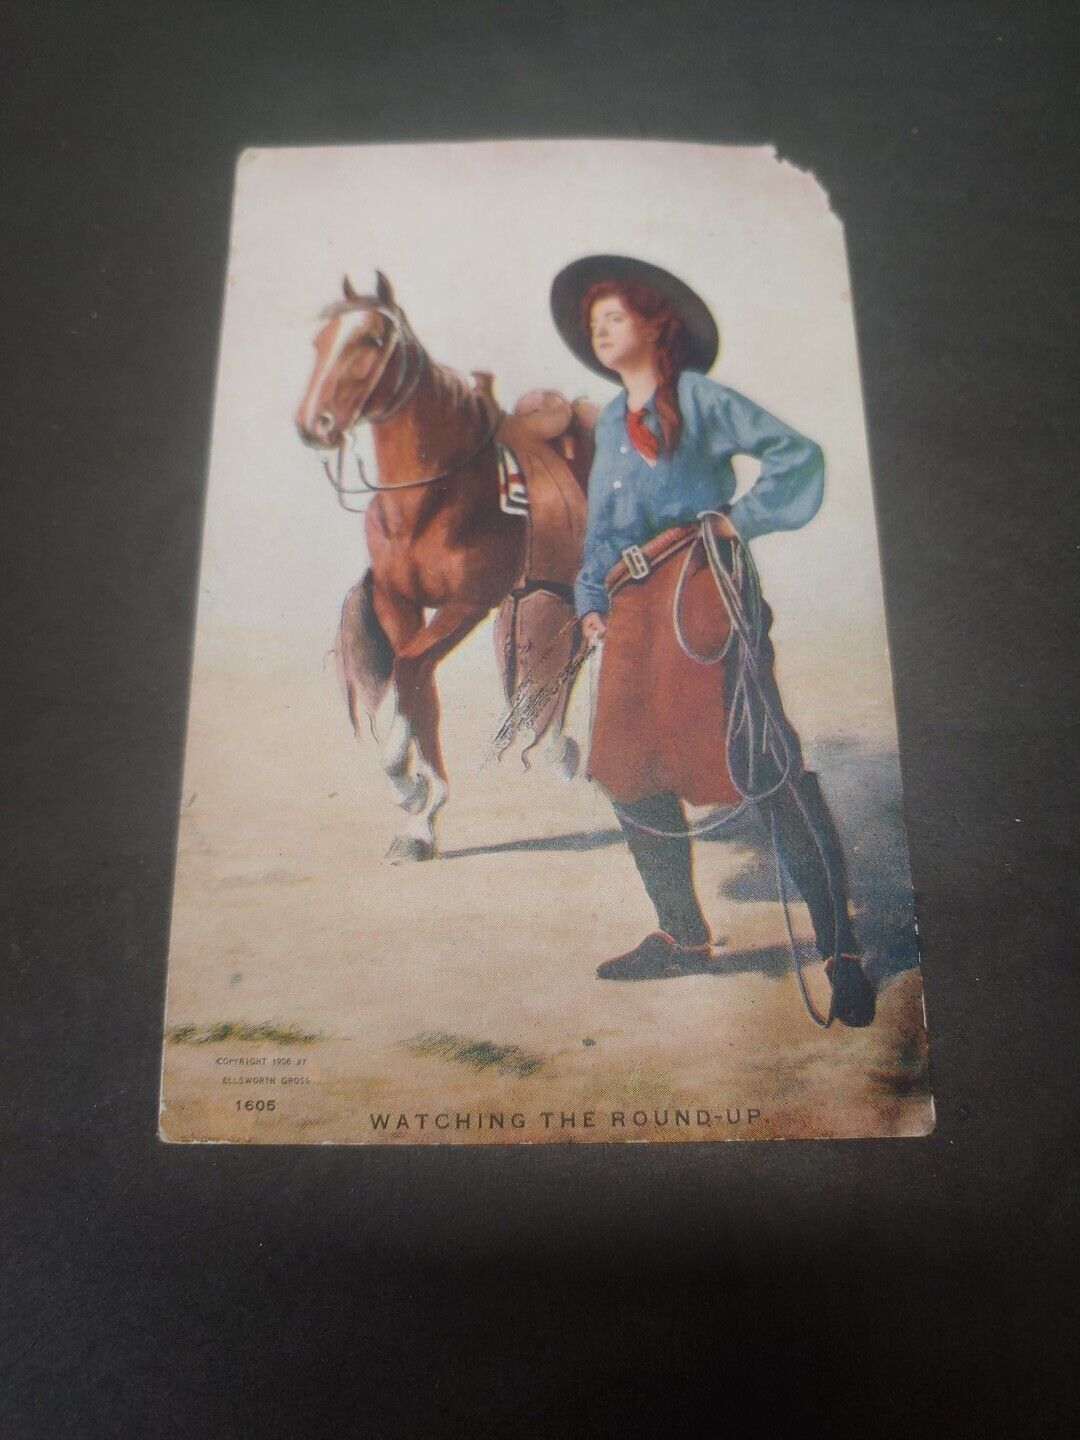 WOMAN DRESSED IN COWGIRL OUTFIT WITH A HORSE UsedPost Card 1908 From Lawrence KS